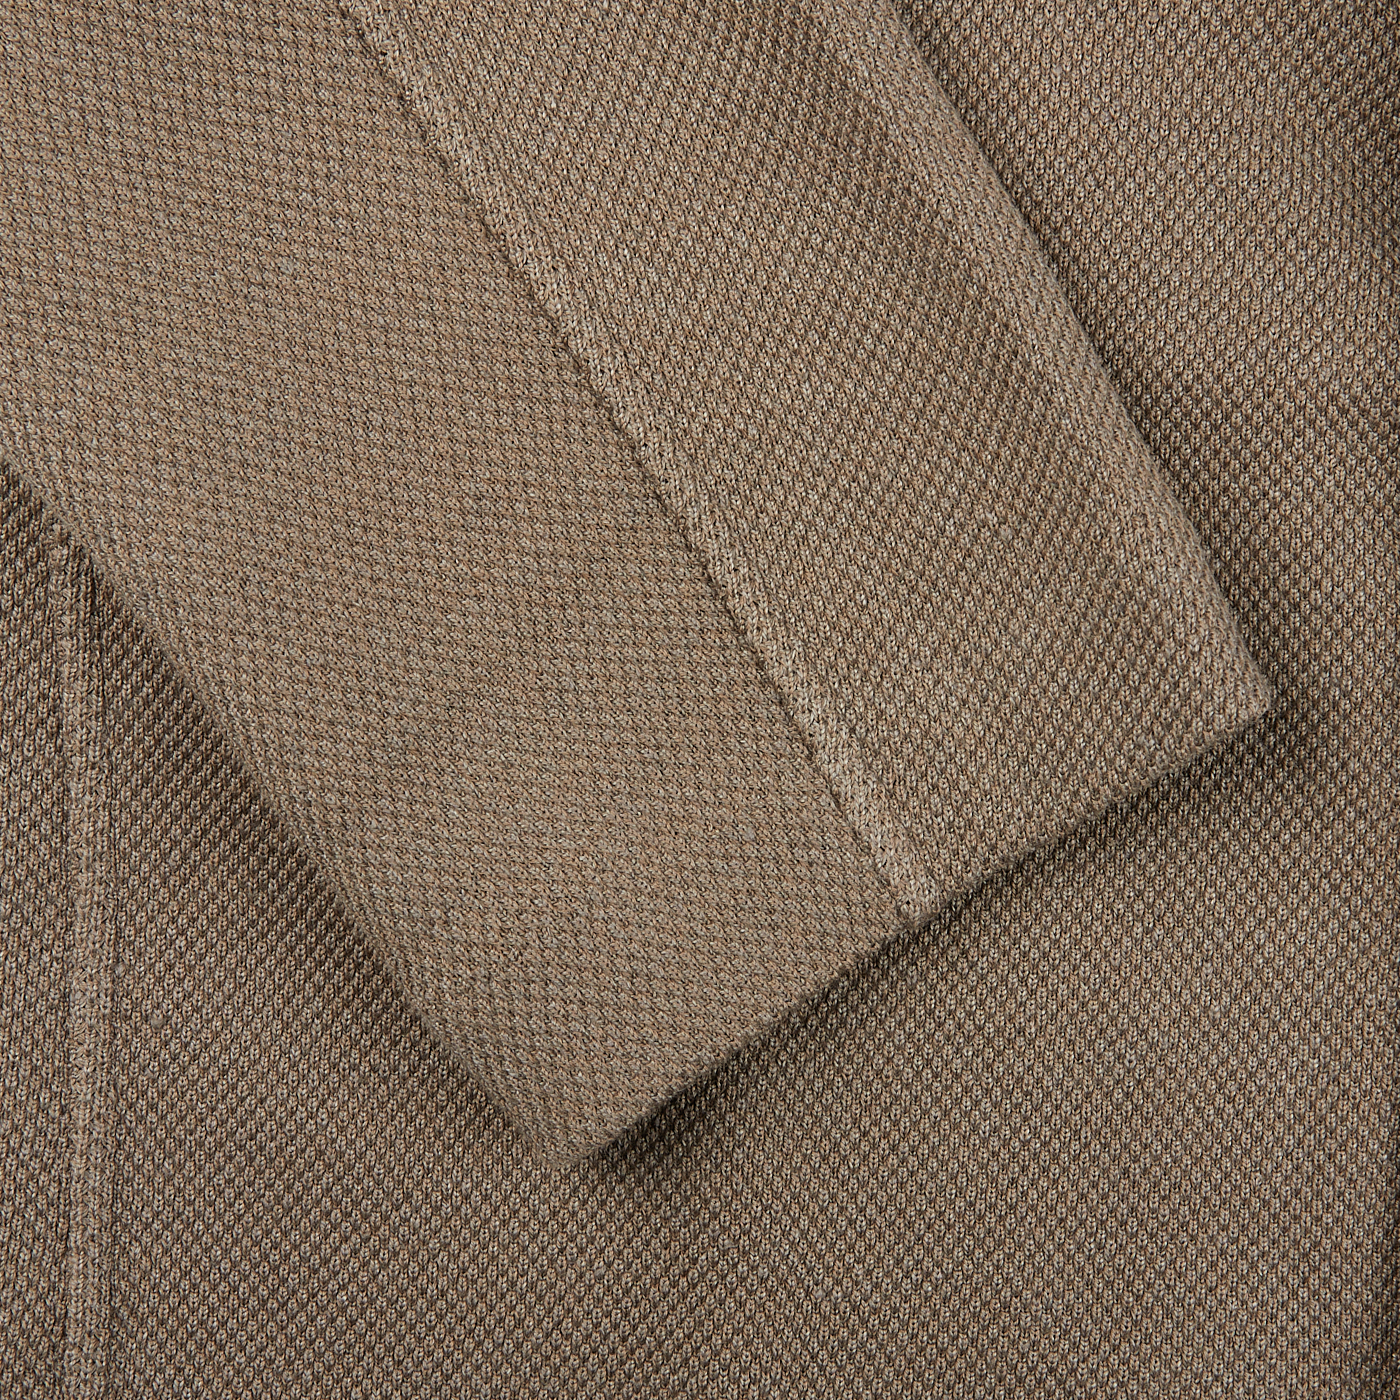 A close up of a Gran Sasso Taupe Brown Cotton Linen Knitted Blazer.